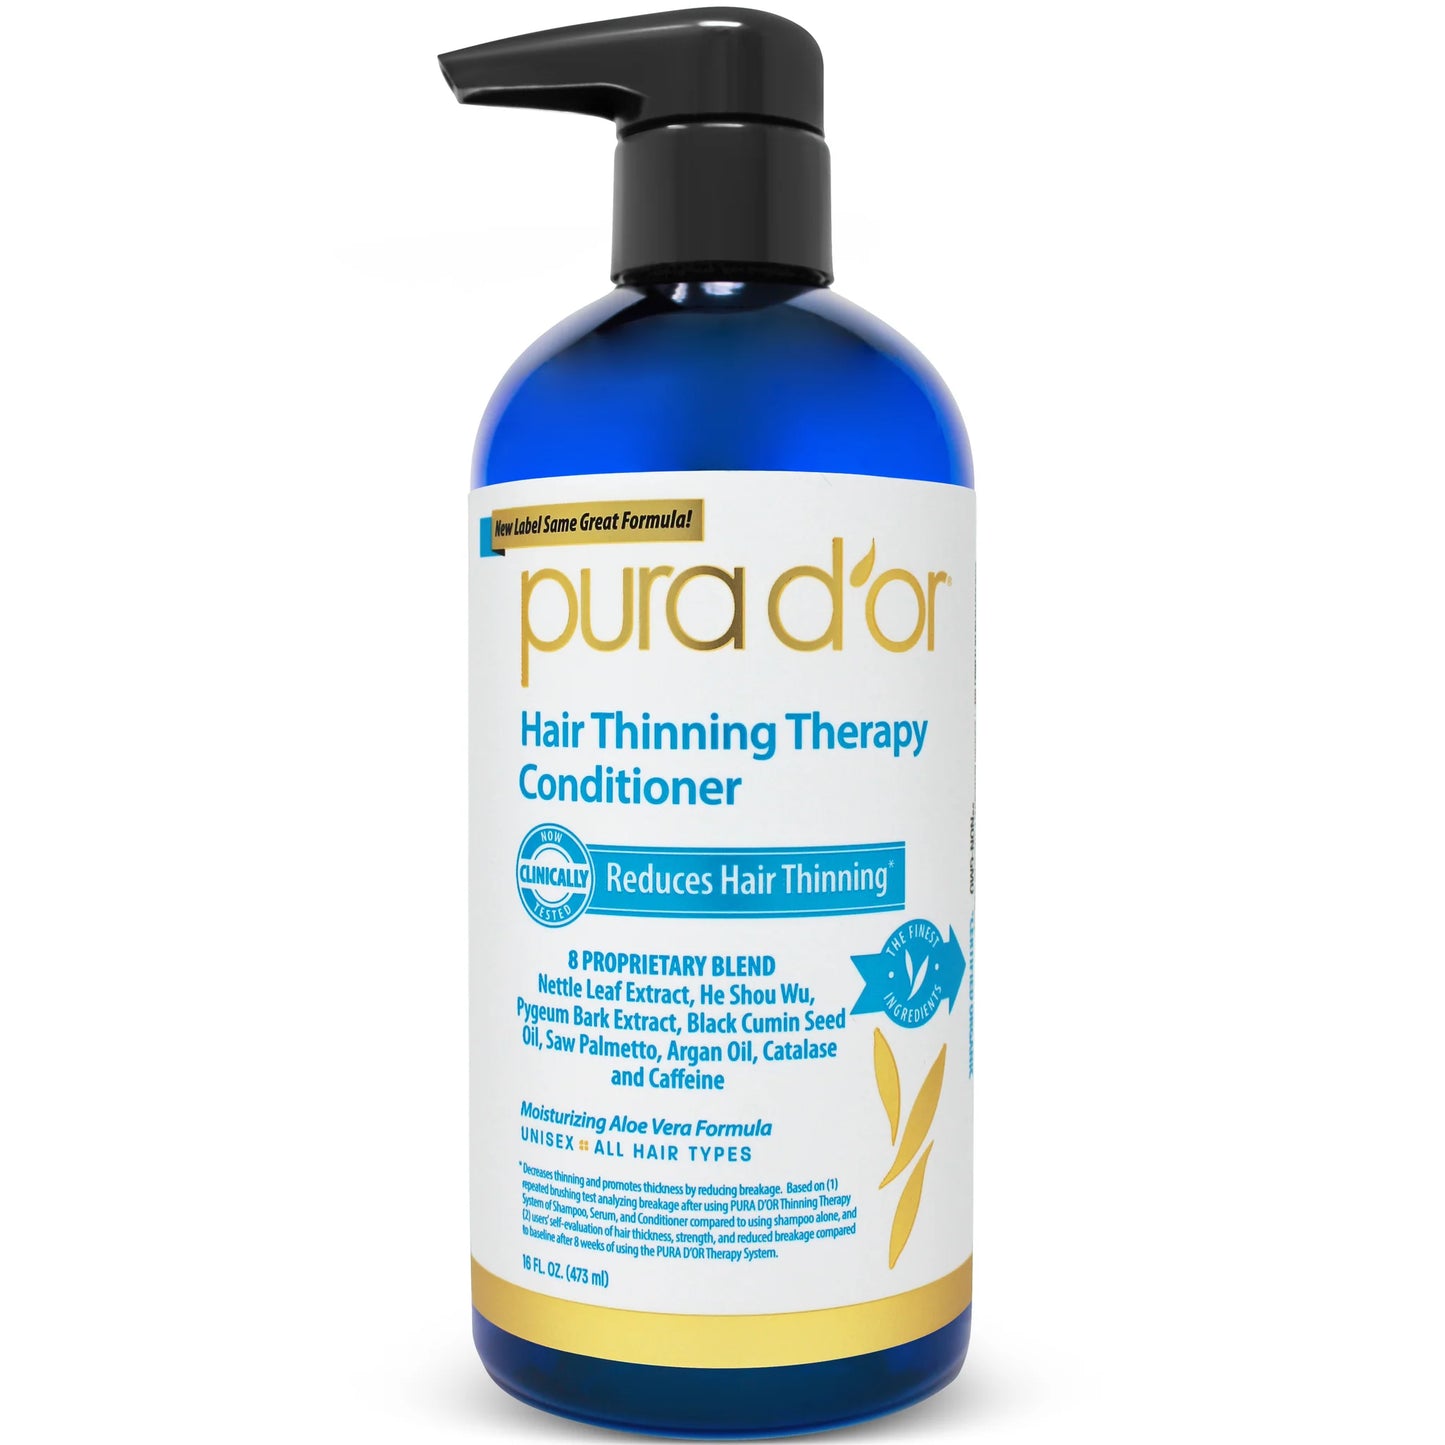 Hair Thinning Therapy Conditioner